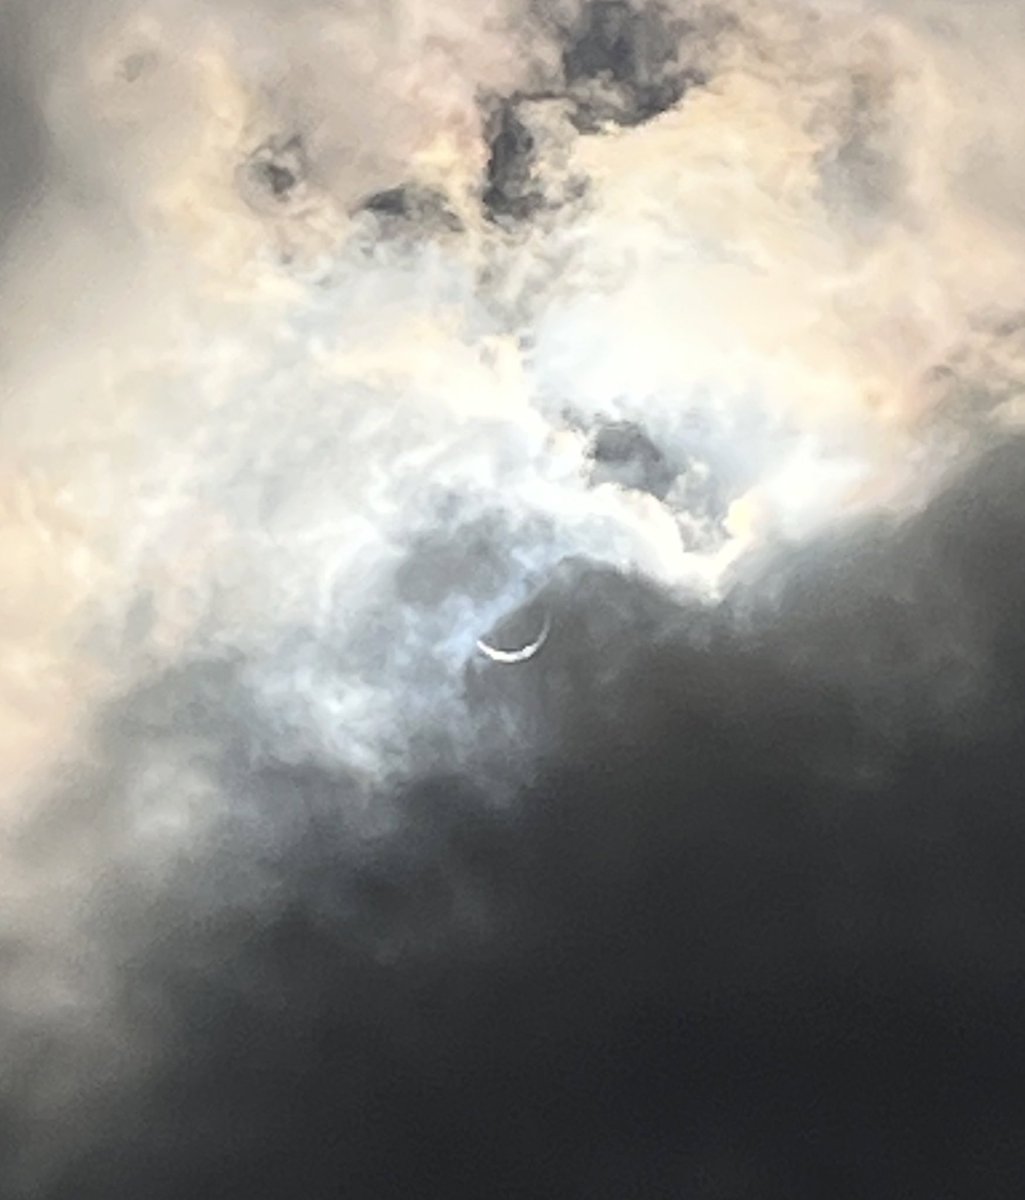 The best I could get … #Eclipse Niagara